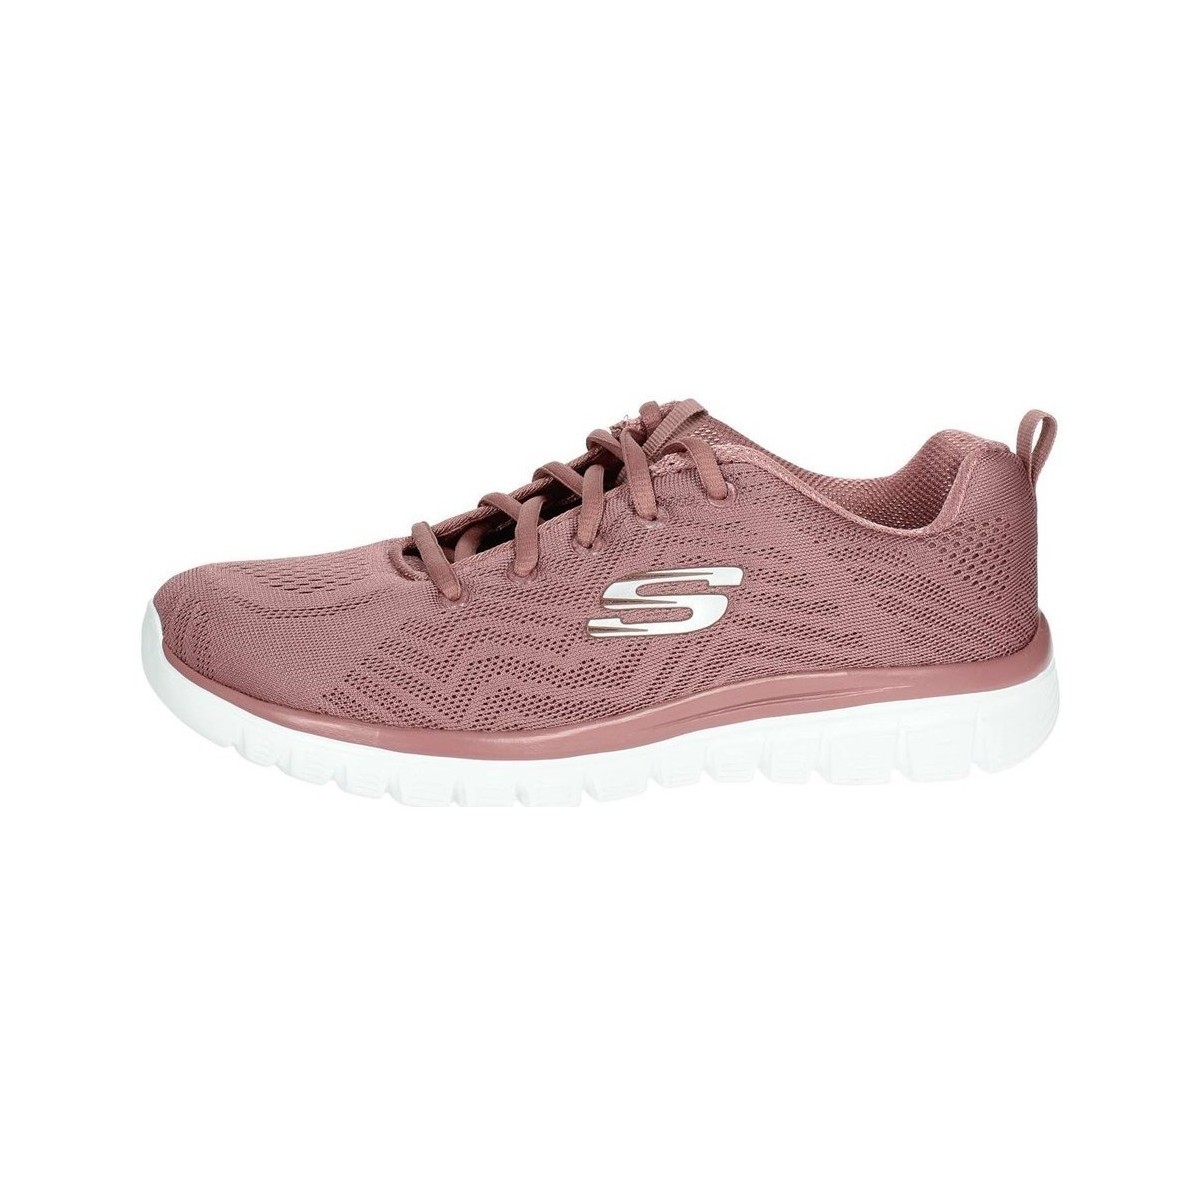 Sapatos Mulher Fitness / Training  Skechers Graceful Get Connected Rosa